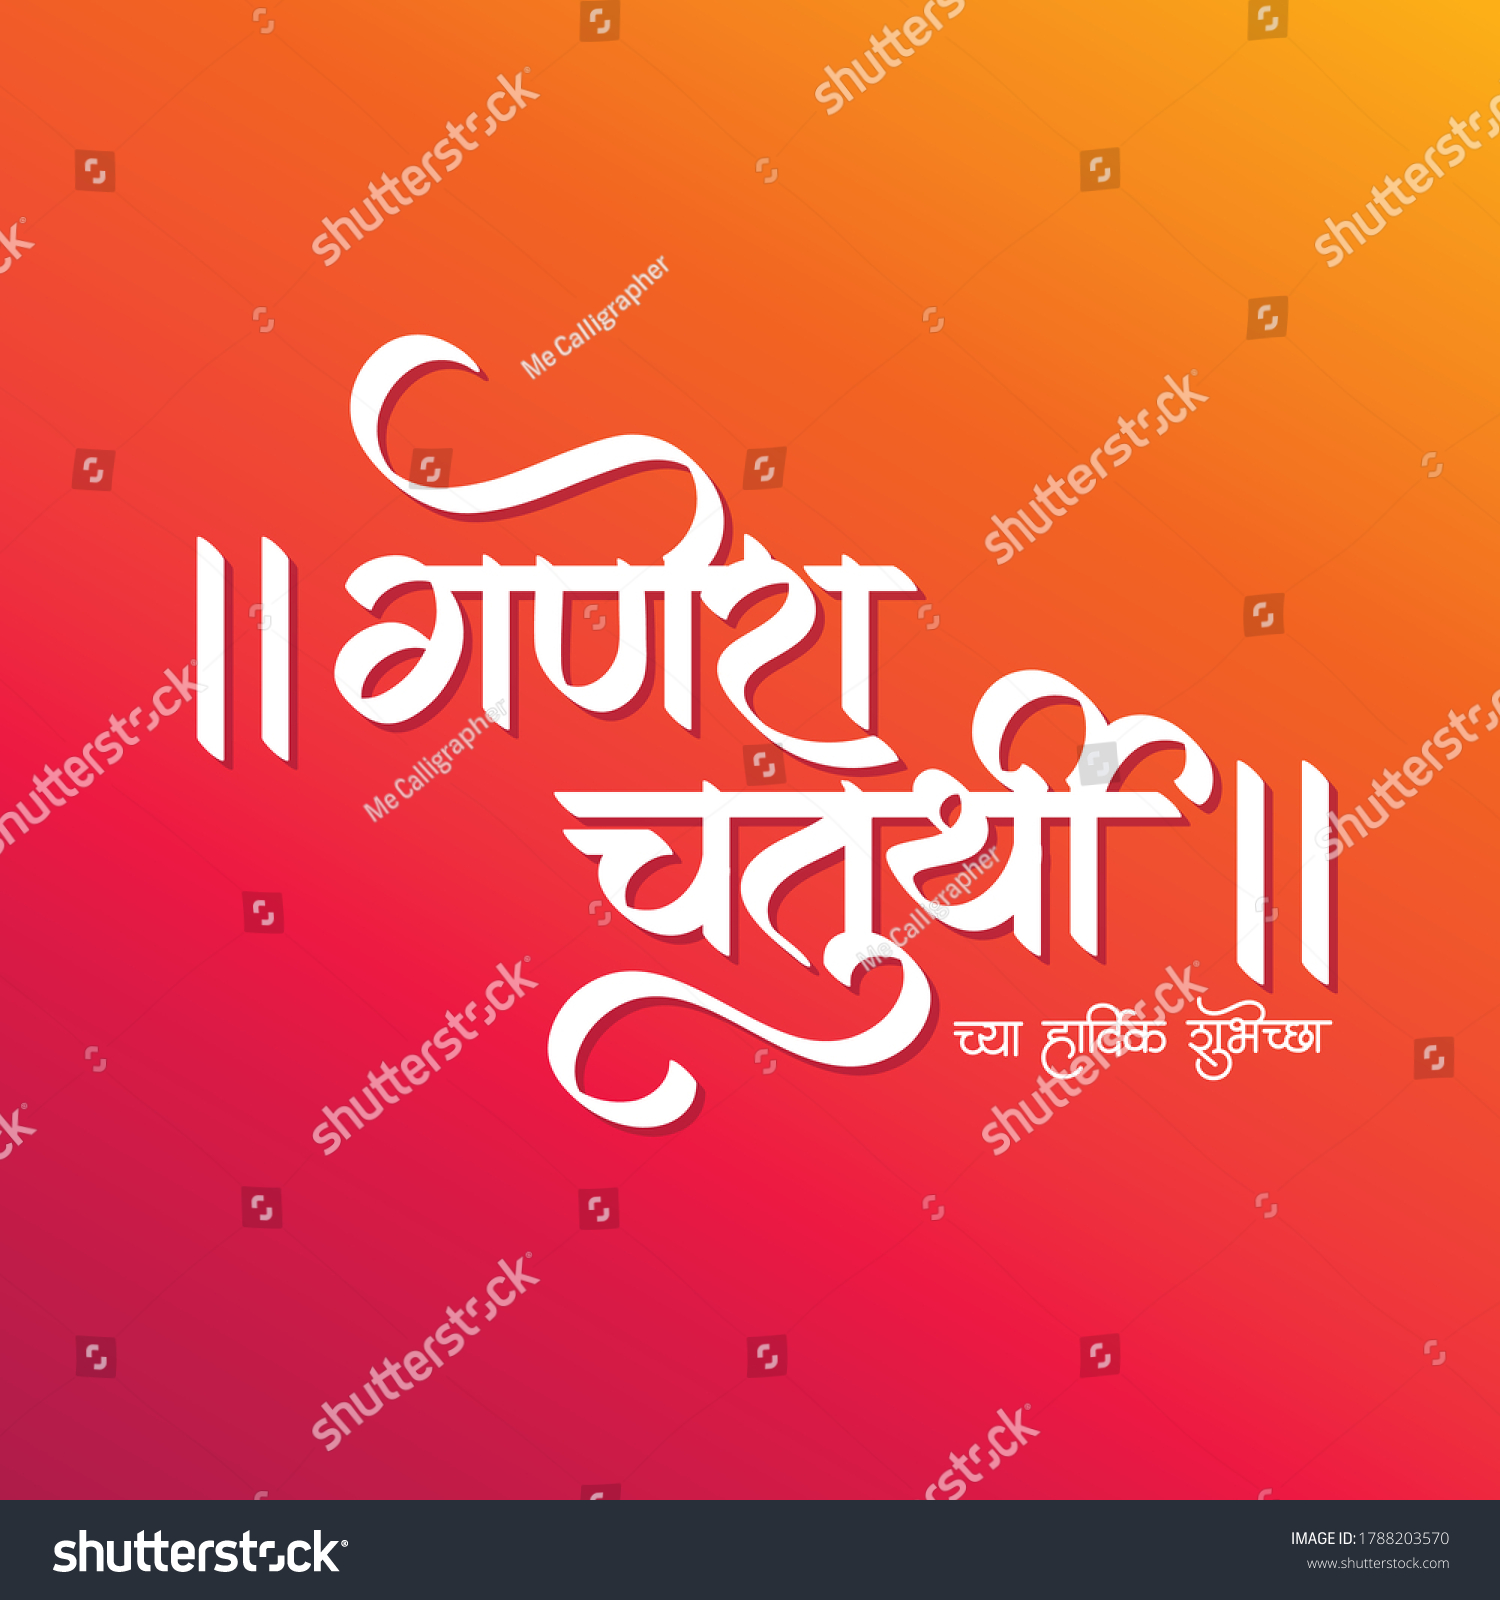 Ganesh Chaturthi Poster Ganesh Chaturthi Chya Stock Vector Royalty Free 1788203570 The first section of the mahabharata states that it was ganesha who wrote down the text to vyasa's dictation. shutterstock